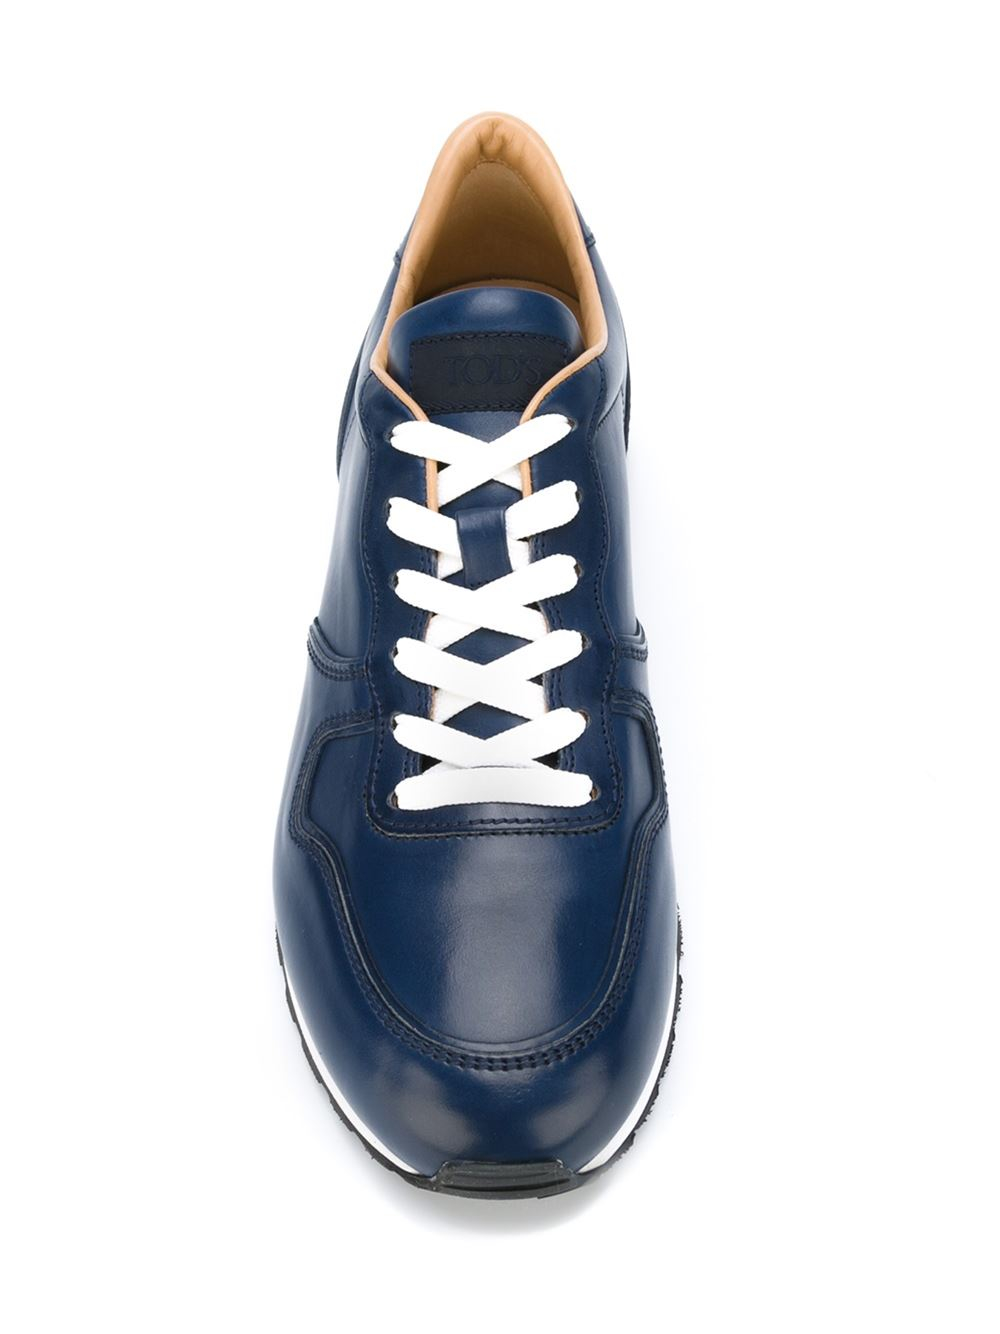 Lyst - Tod'S Low-top Sneakers in Blue for Men